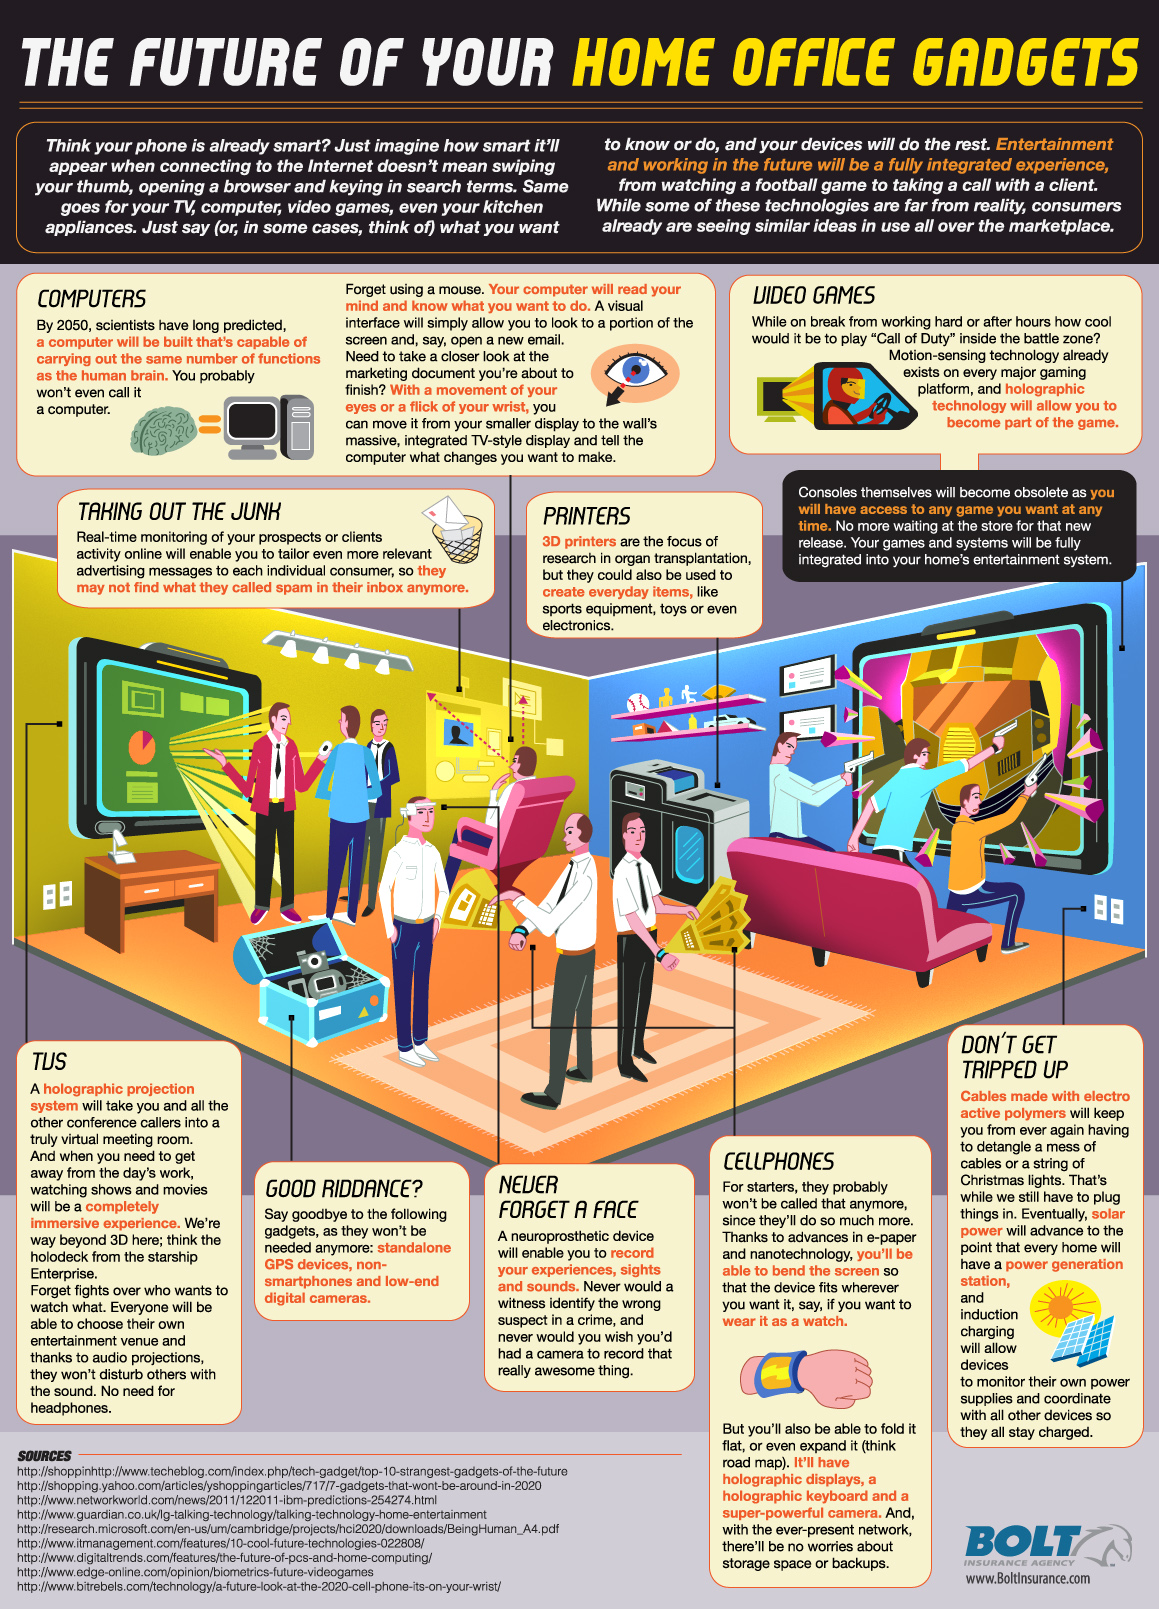 https://i.visual.ly/images/future-of-your-home-office-gadgets-infographic-explores-the-future-technology-of-the-home-office_5029151aa7bec.jpg